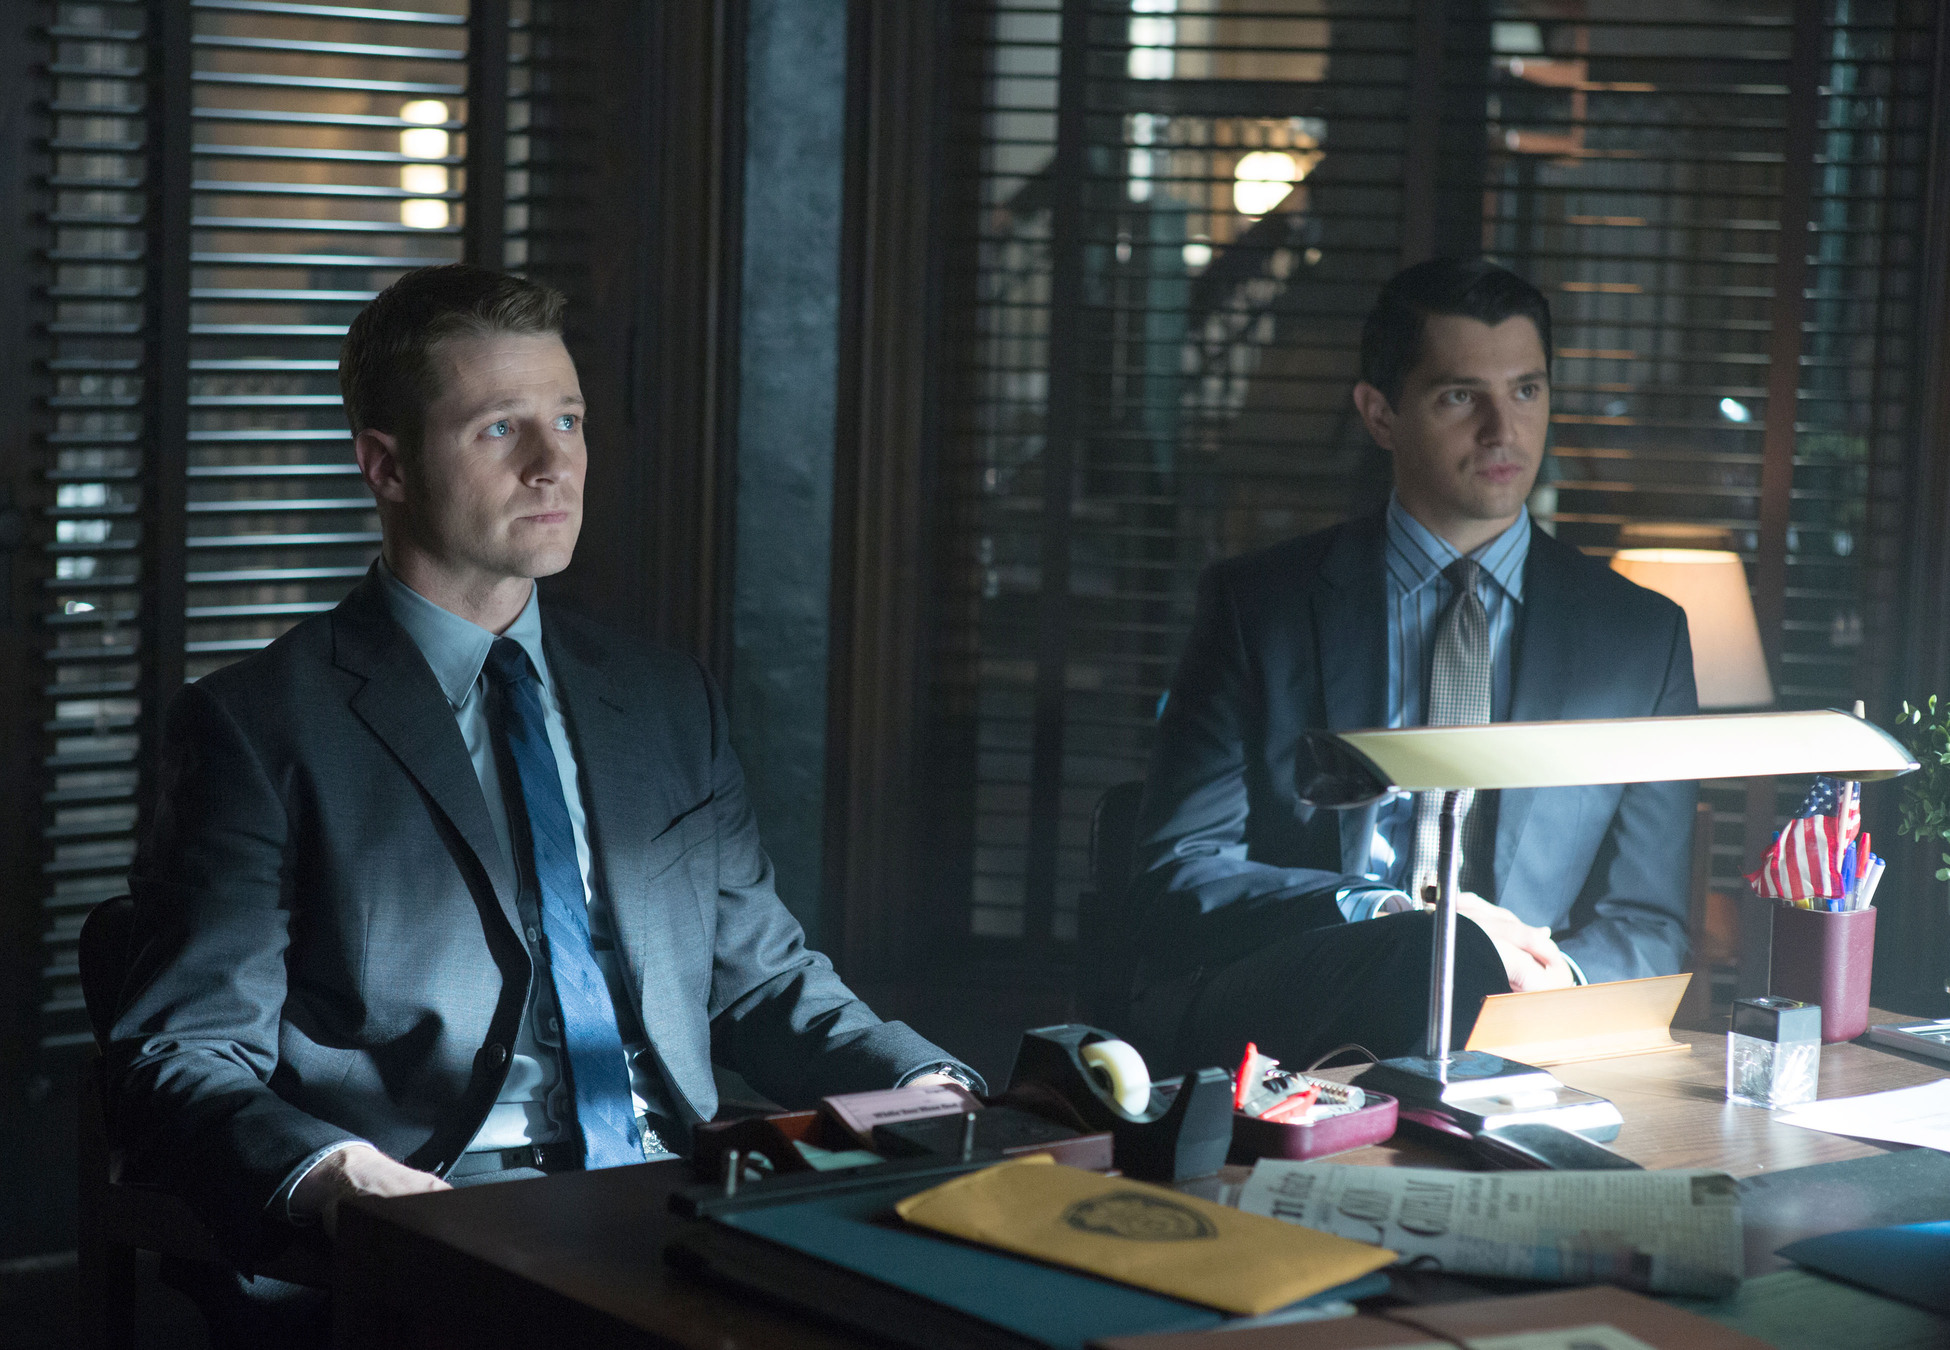 GOTHAM: Detective James Gordon (Ben McKenzie, L) and Harvey Dent (guest star Nicholas D'Agosto, R) are reprimanded by the Mayor in the "Lovecraft" episode of GOTHAM airing Monday, Nov. 24 (8:00-9:00 PM ET/PT) on FOX. Â©2014 Fox Broadcasting Co. Cr: Jessica Miglio/FOX